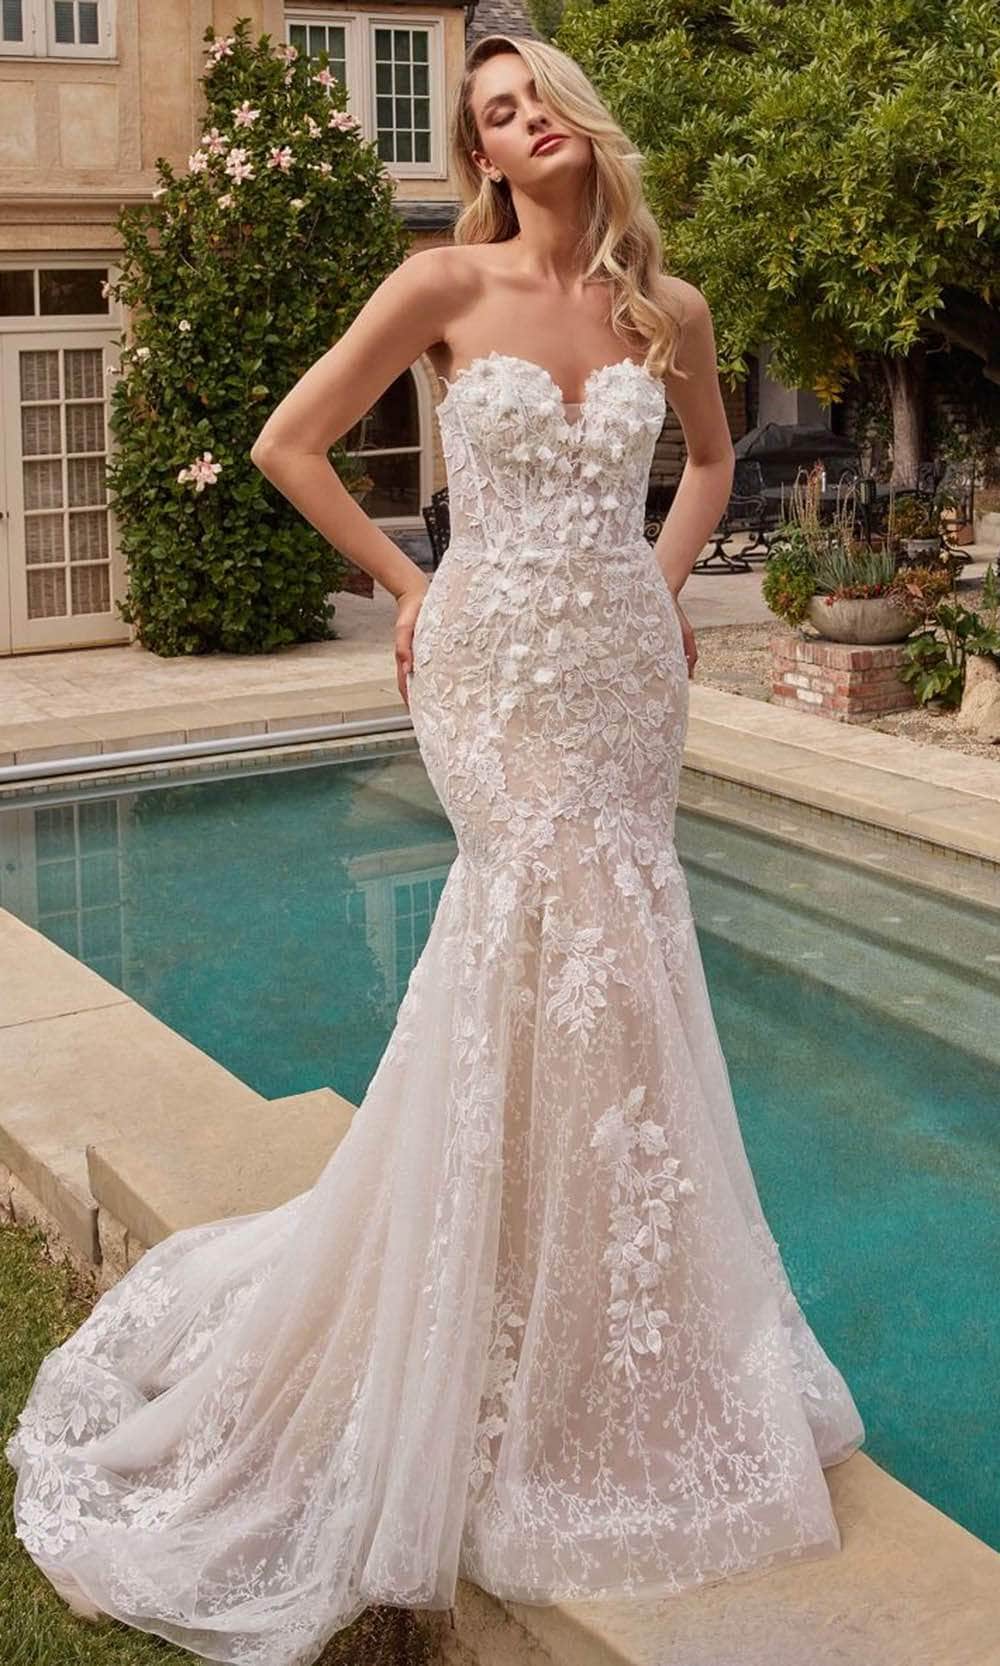 Ladivine CDS431W - Mermaid Bridal Gown 2 / Off White-Nude